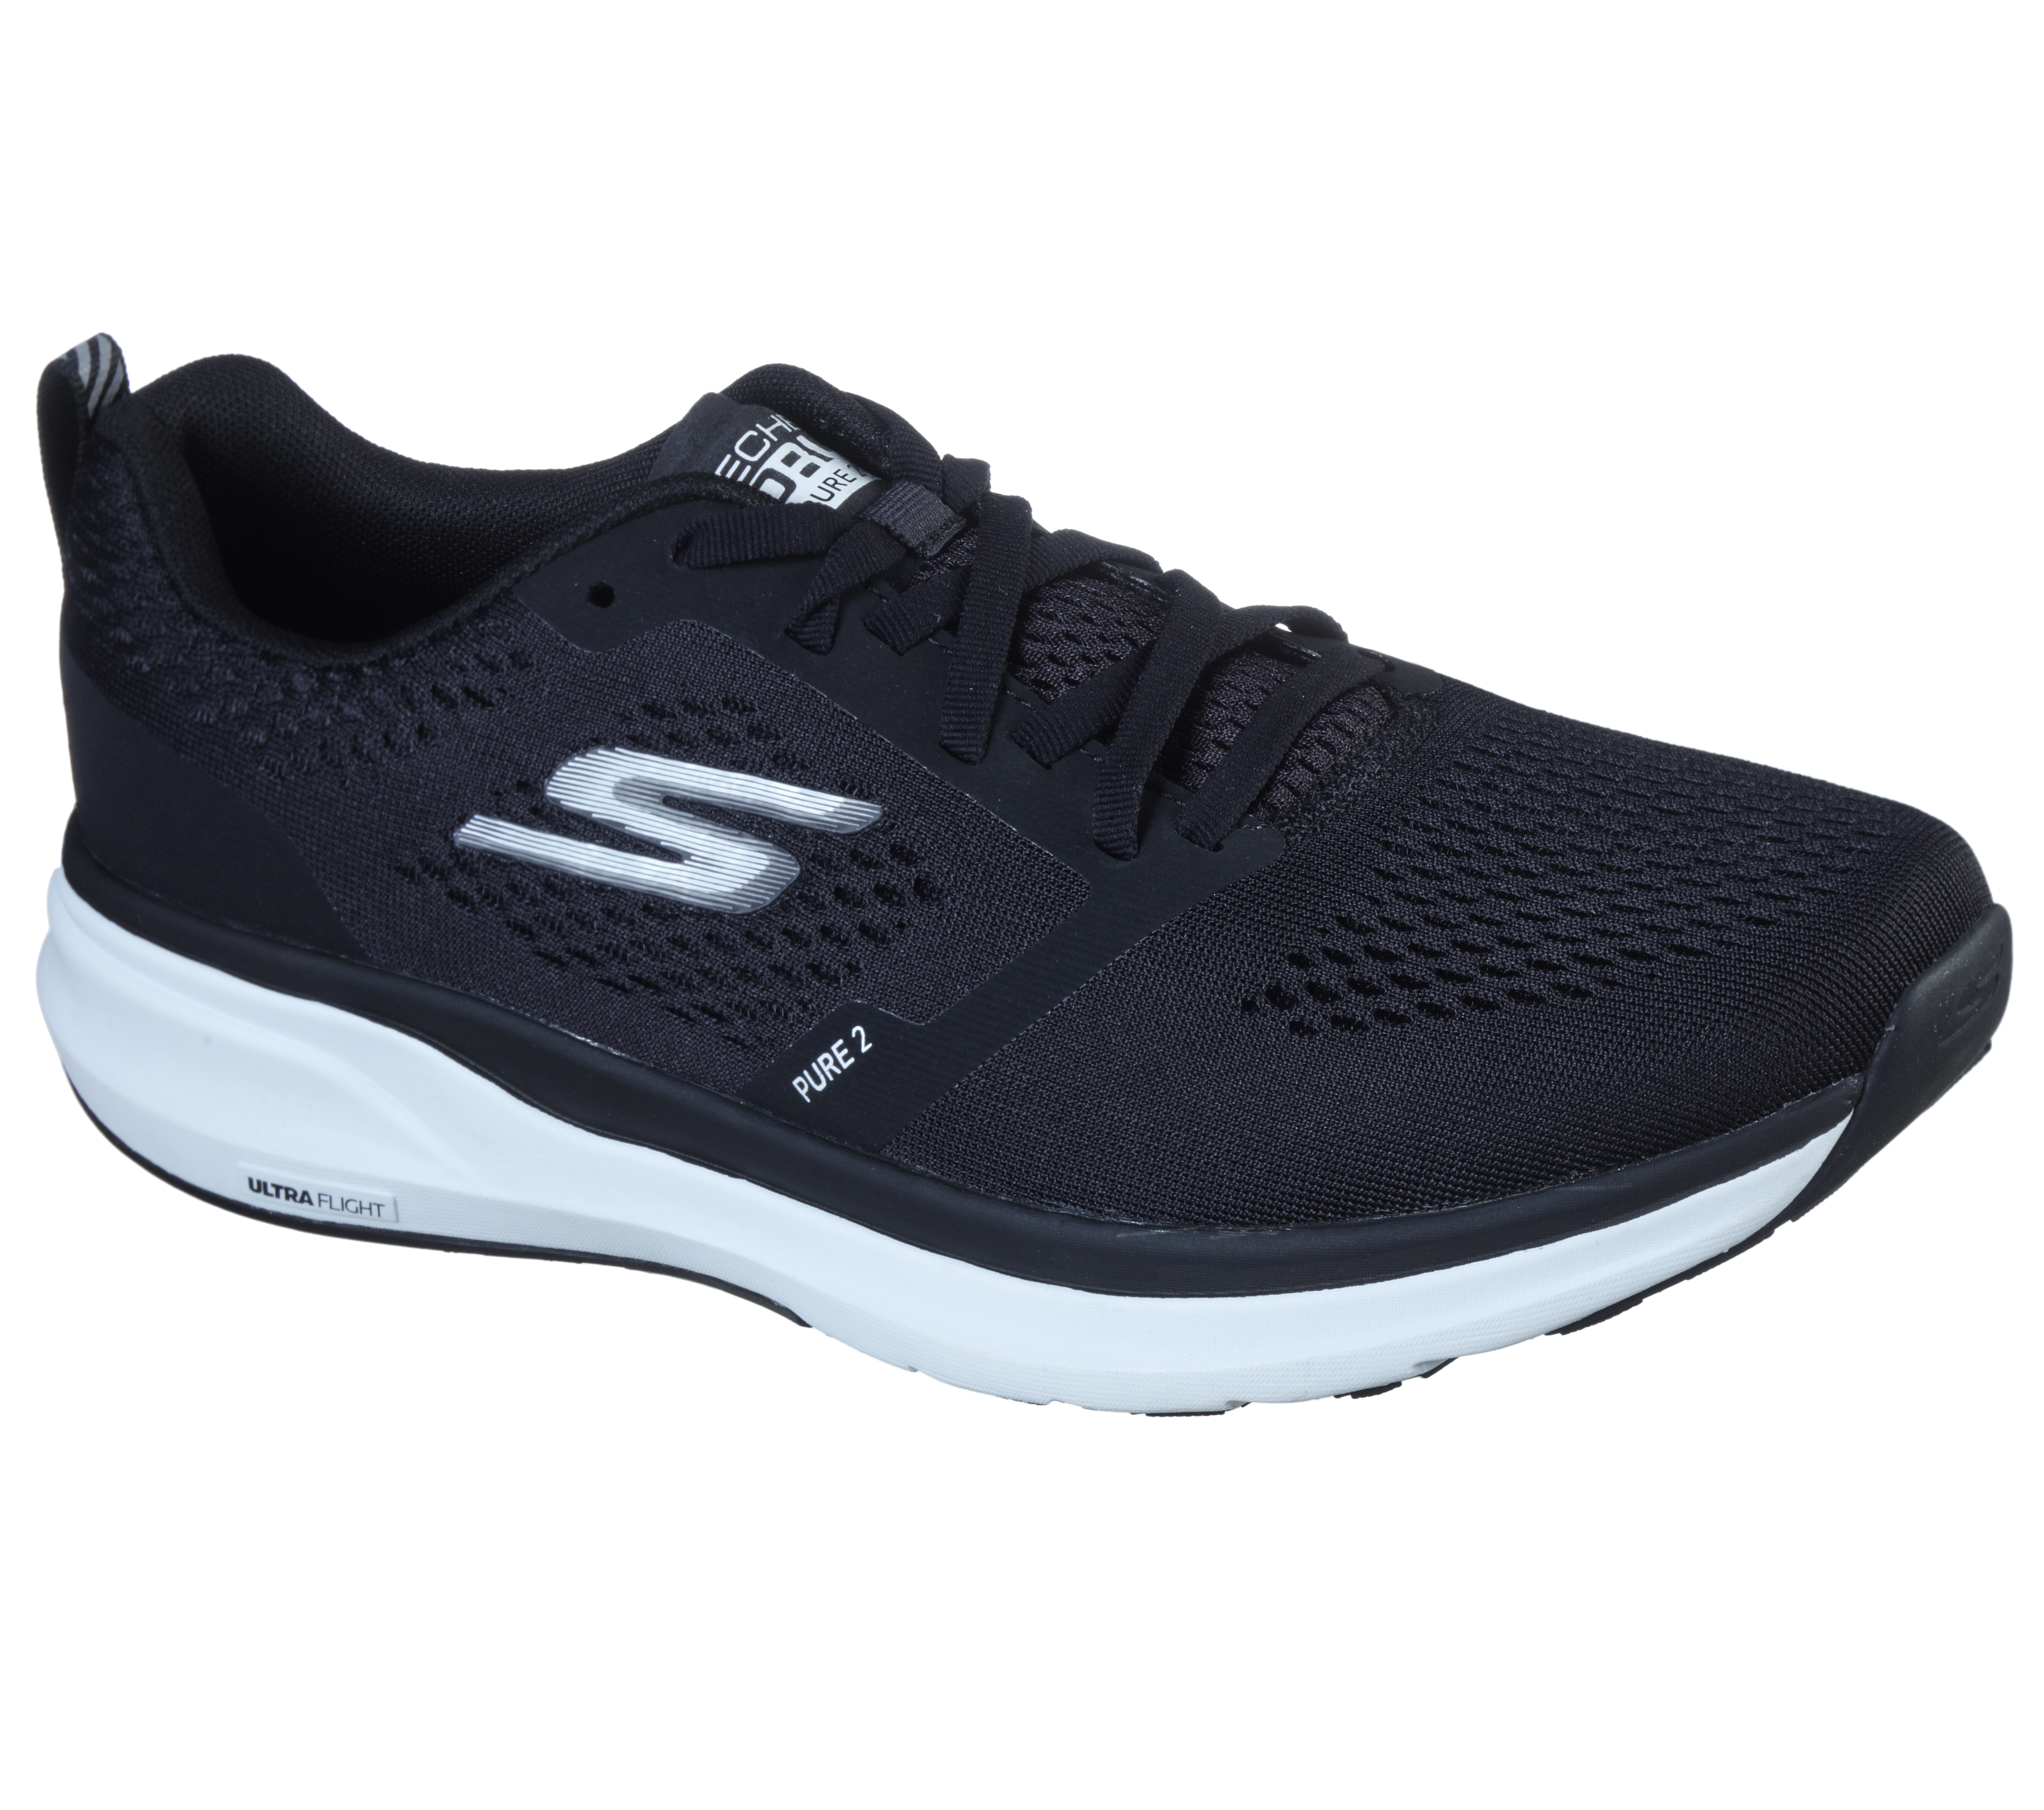 skechers men's go run 3 track and field shoes